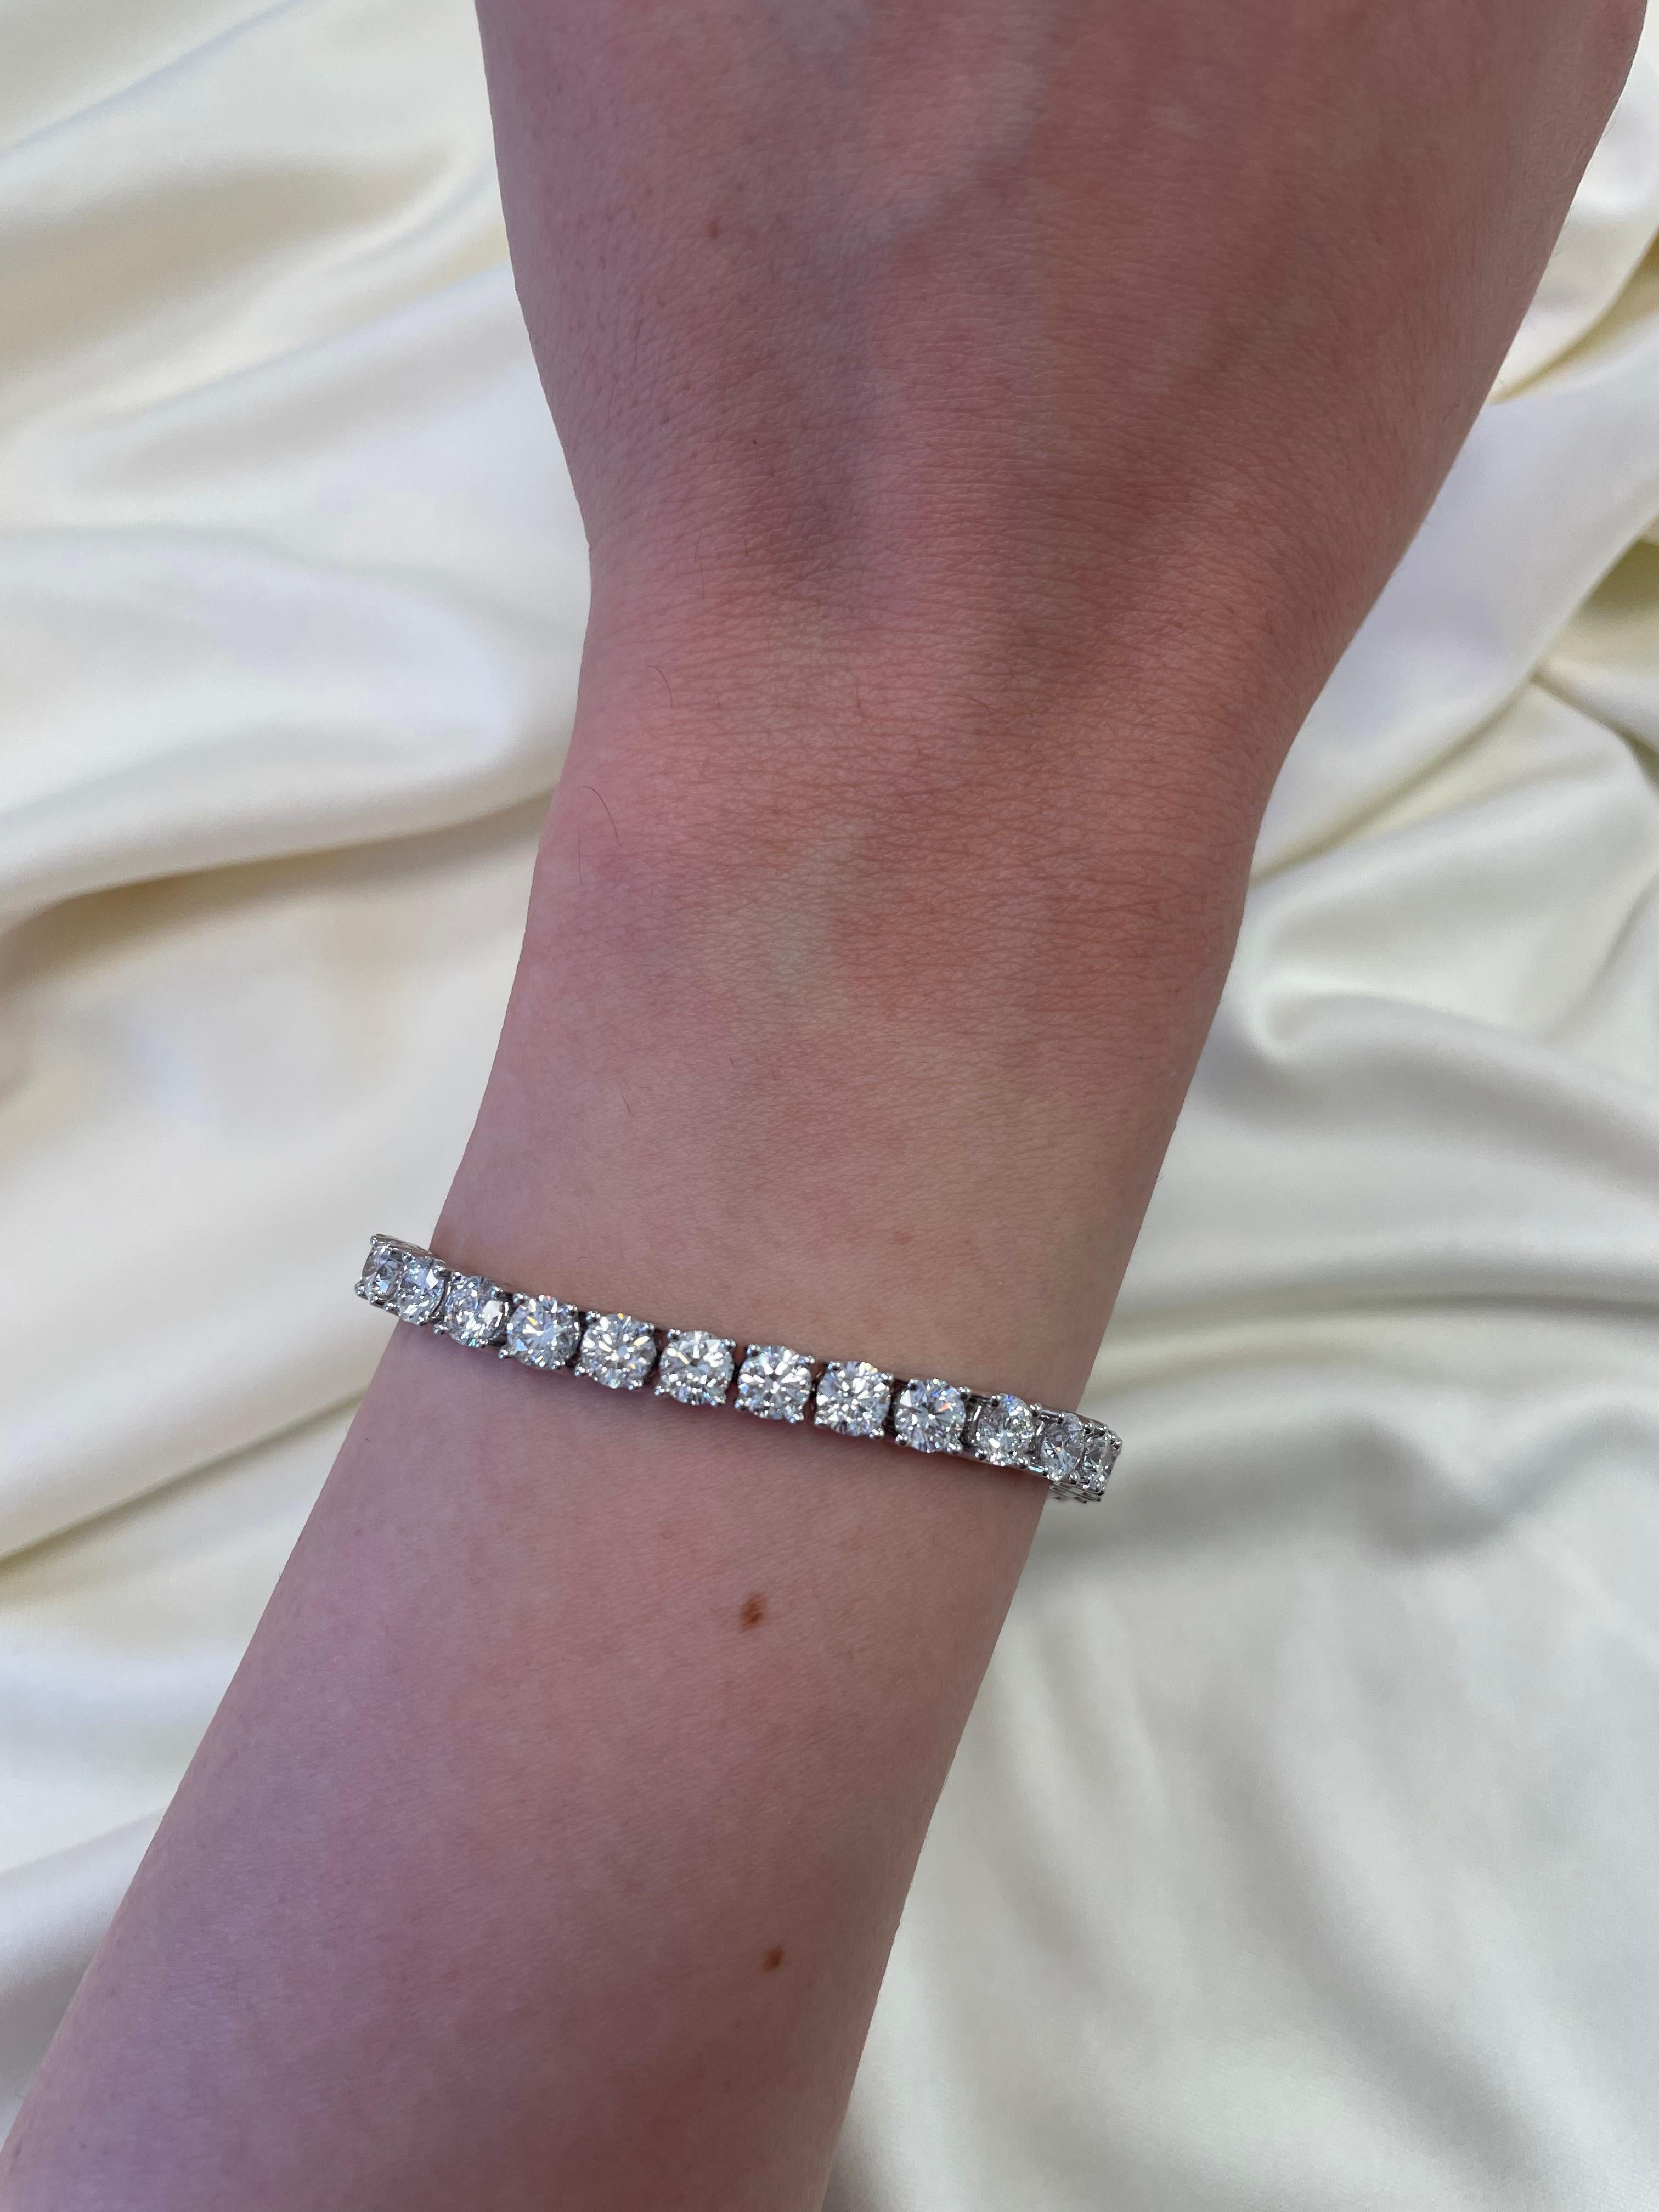 Stunning modern diamond tennis bracelet, all each stone GIA certified. High jewelry by Alexander Beverly Hills.
38 round brilliant diamonds, 11.85ct (0.30ct avg). Each stone GIA certified D/E color and SI1 clarity. Platinum, 27.15 grams, 7 inches.